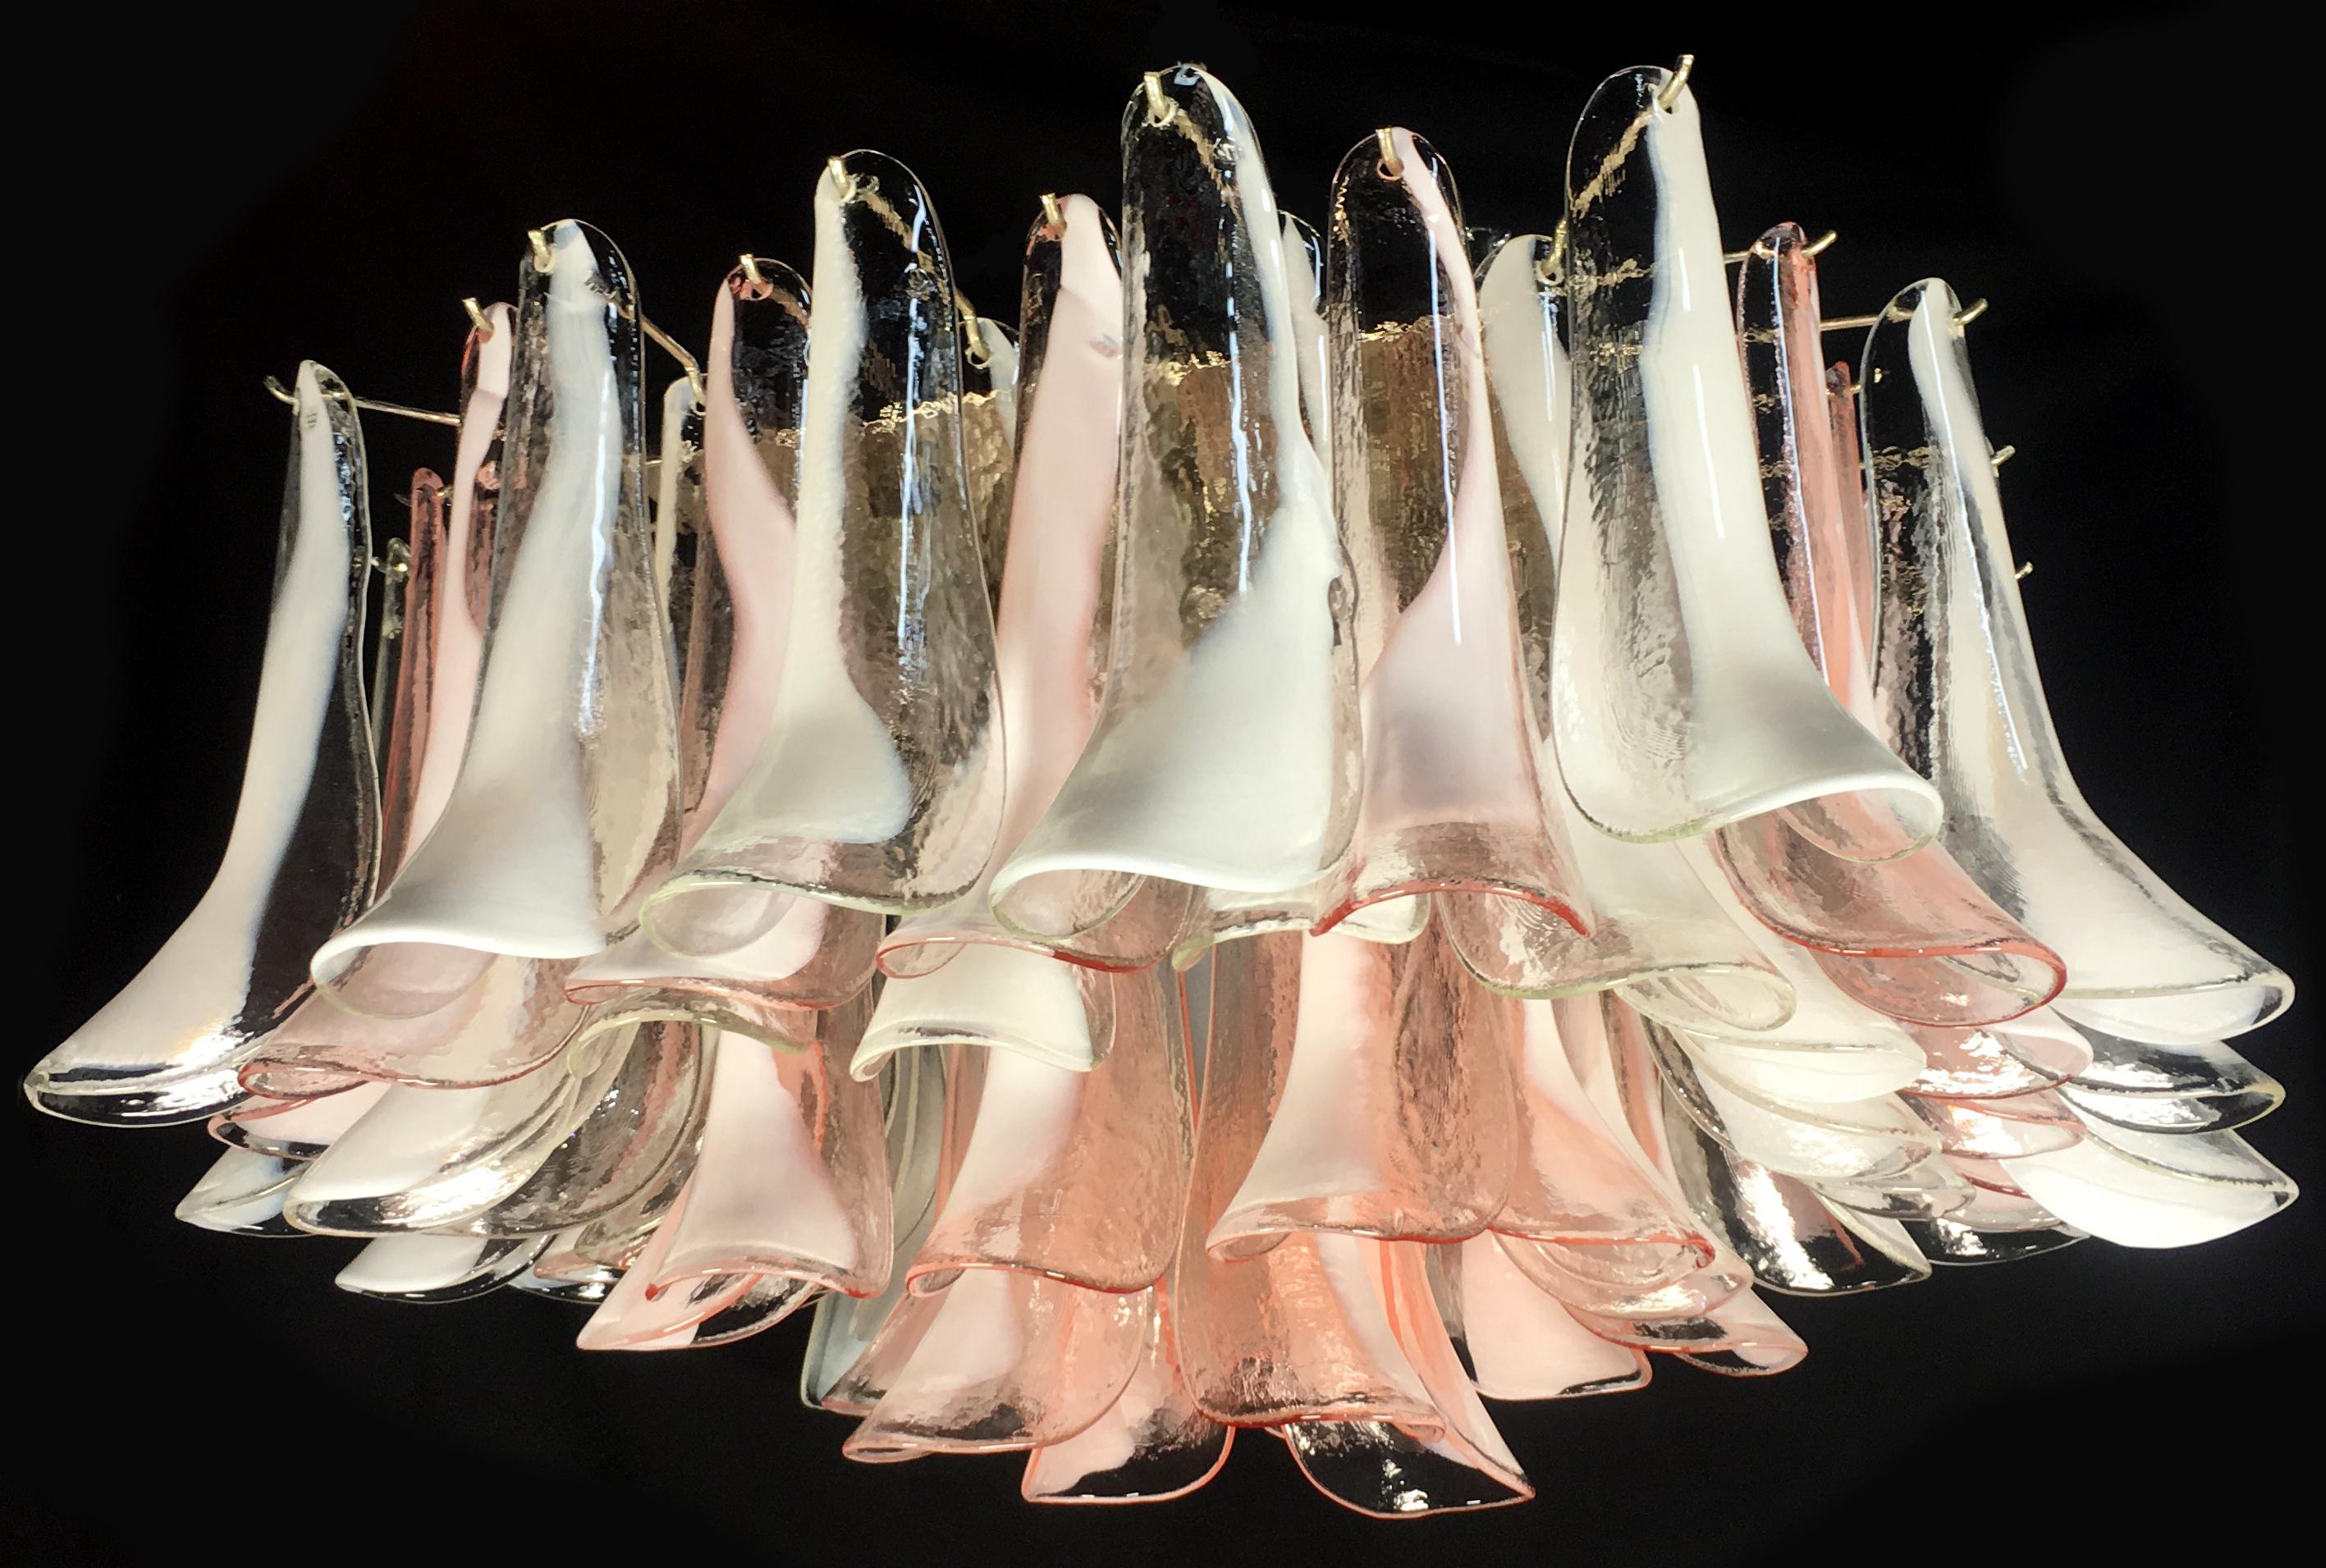 Flamingo' 64 Petal Italian Chandeliers Ceiling Lights, Murano In Excellent Condition For Sale In Budapest, HU